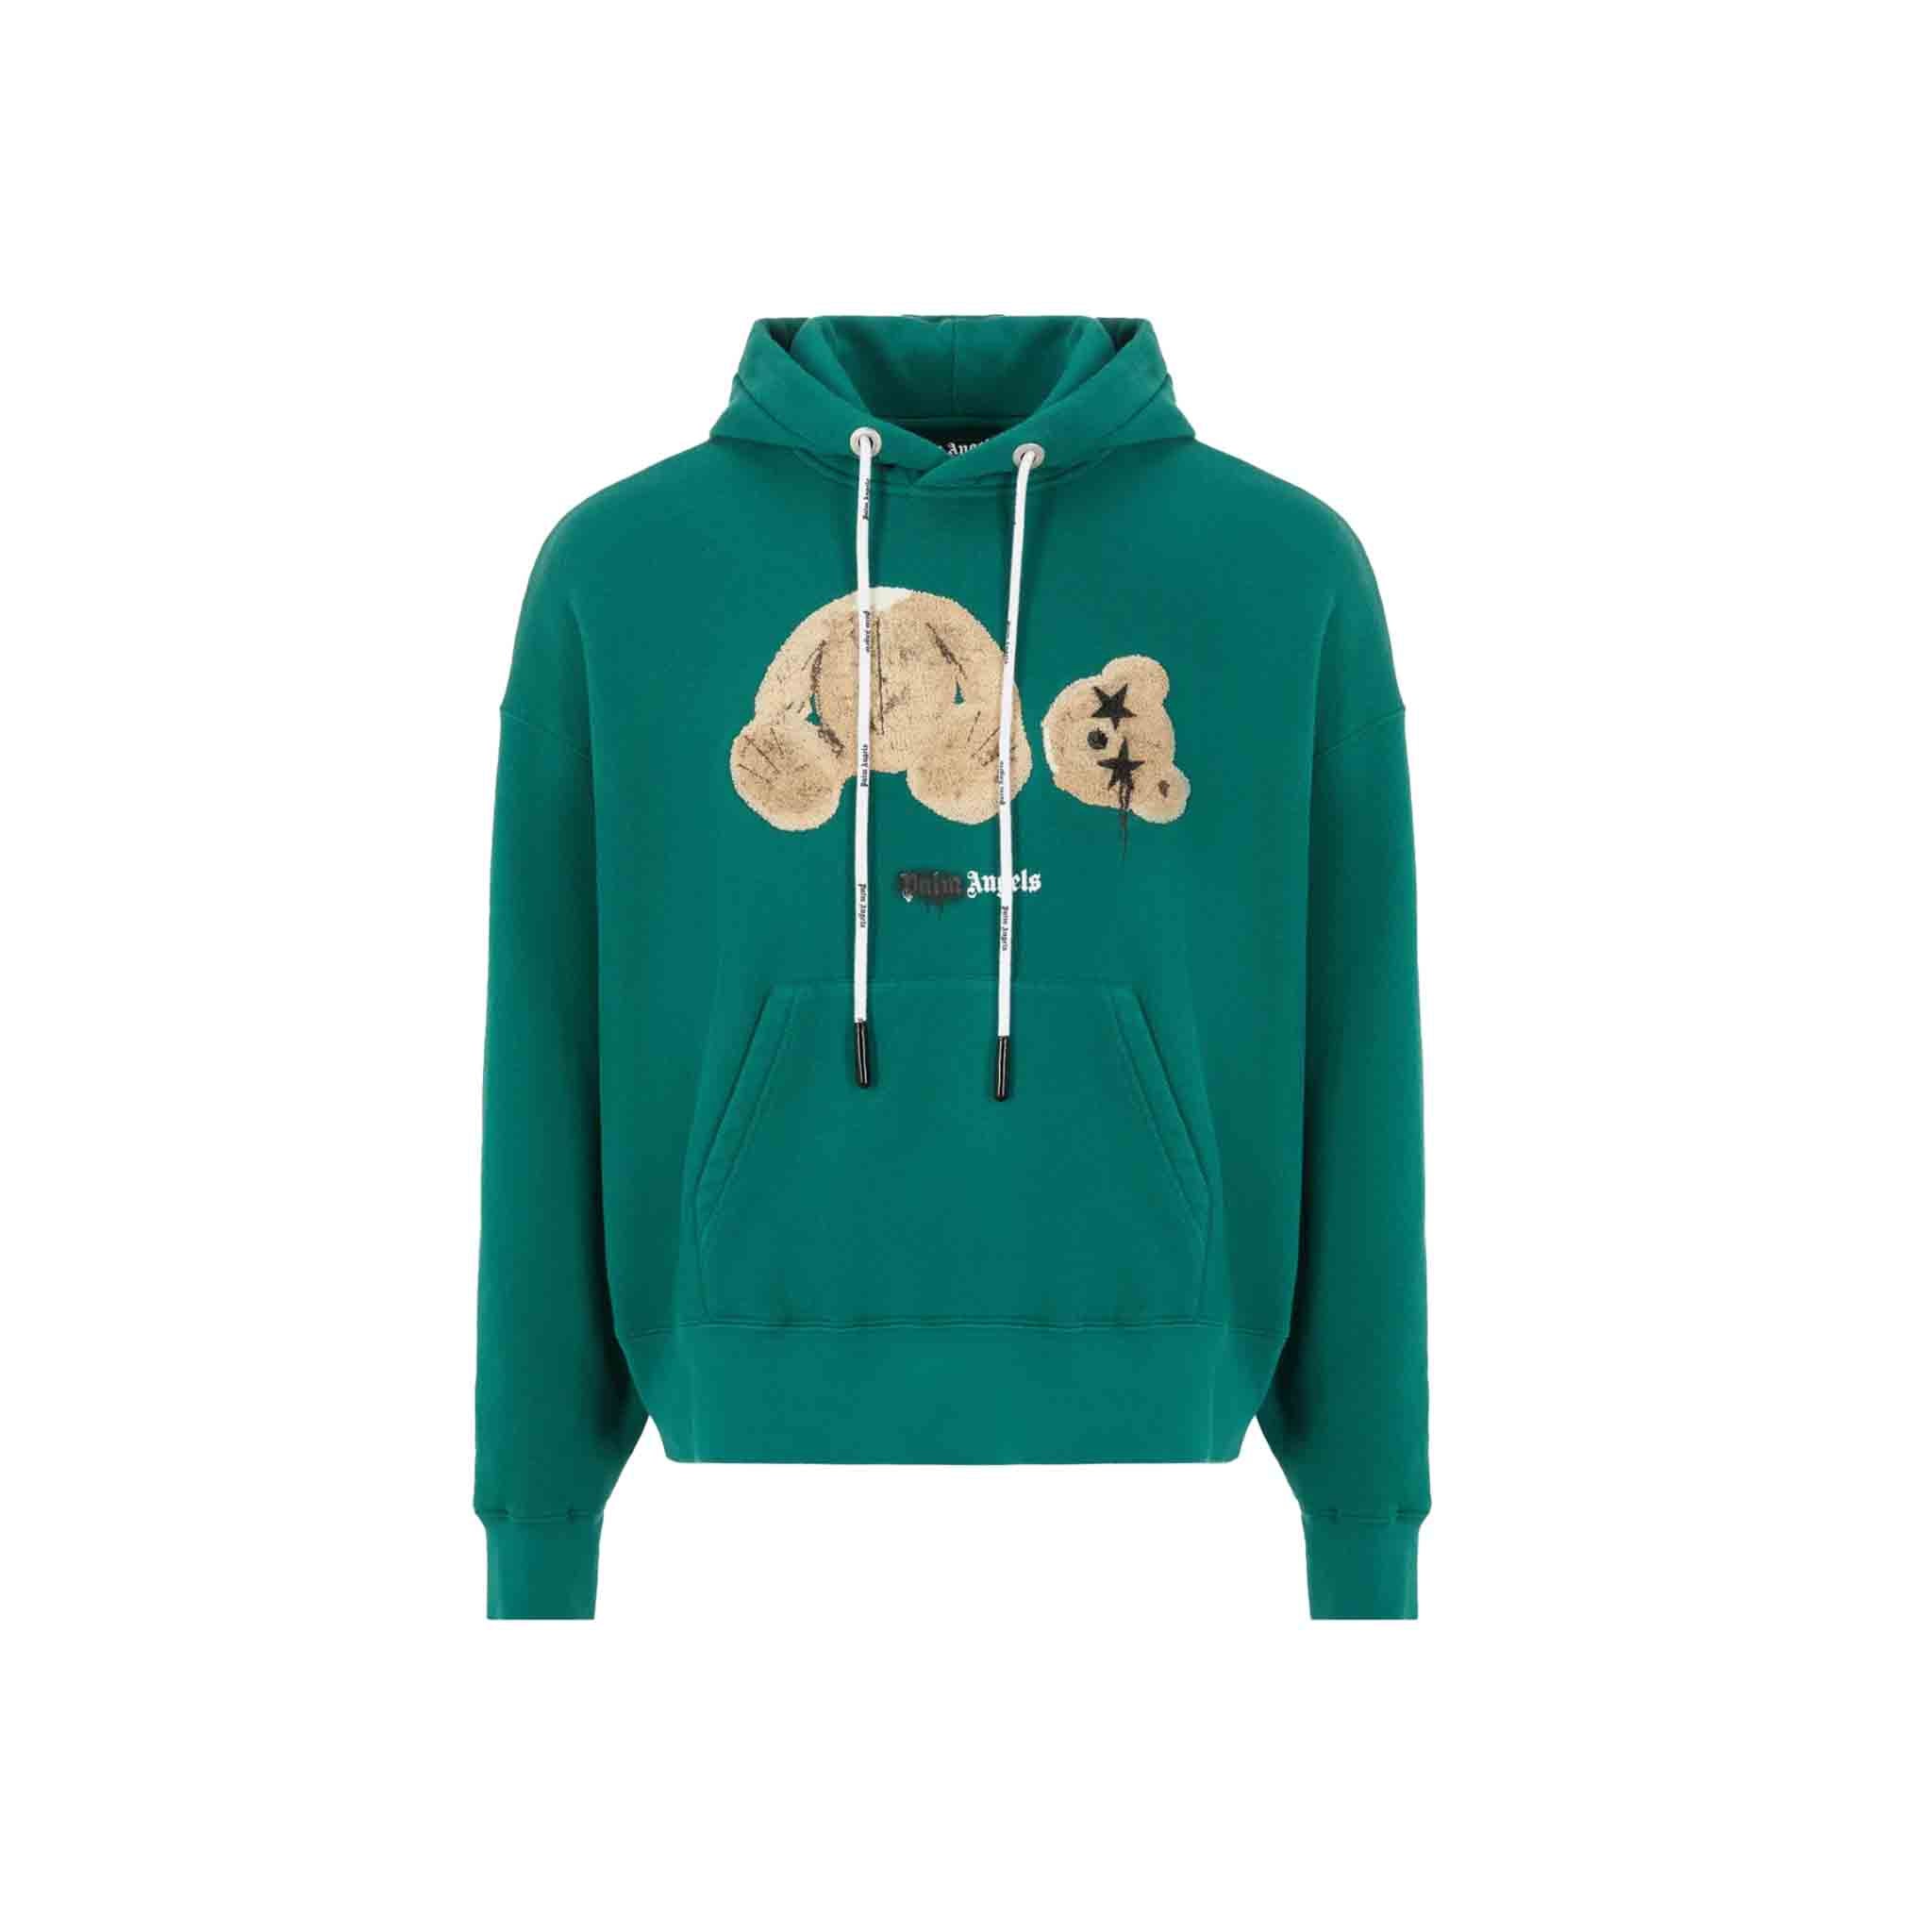 This Palm Angels hooded sweatshirt features a bear graphic embroidered on the front, with a sprayed Palm Angels logo printed below. The sweatshirt also has a kangaroo pocket and logo drawstrings. It has an oversize fit for a relaxed and comfortable wear. Made from a soft and durable cotton material, this sweatshirt is perfect for keeping warm on cool days.